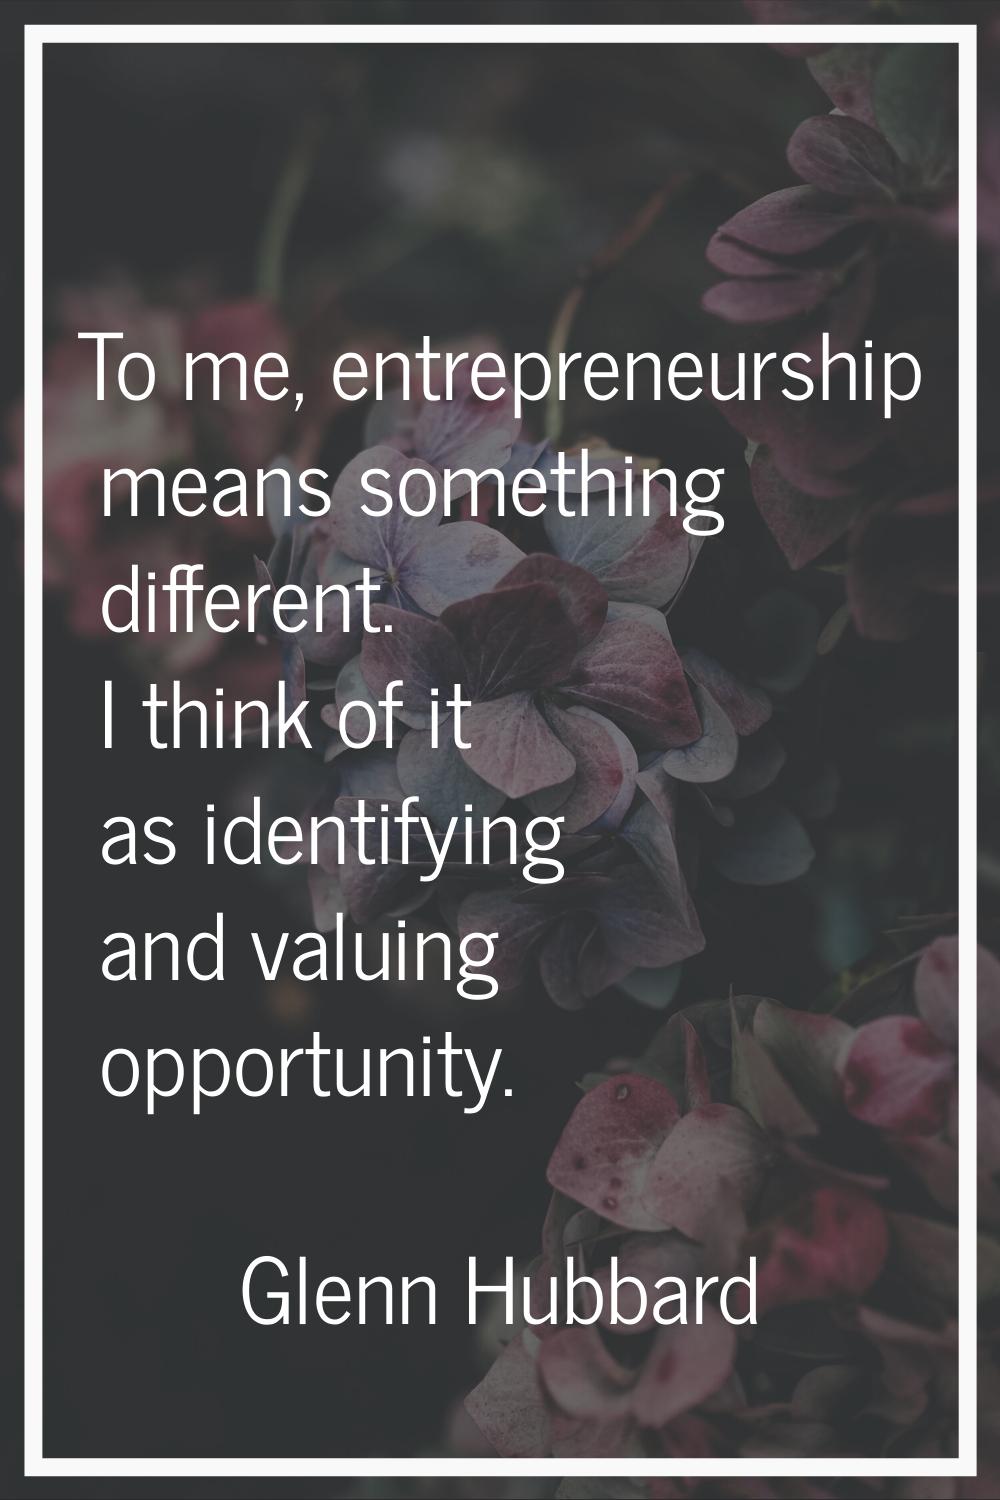 To me, entrepreneurship means something different. I think of it as identifying and valuing opportu